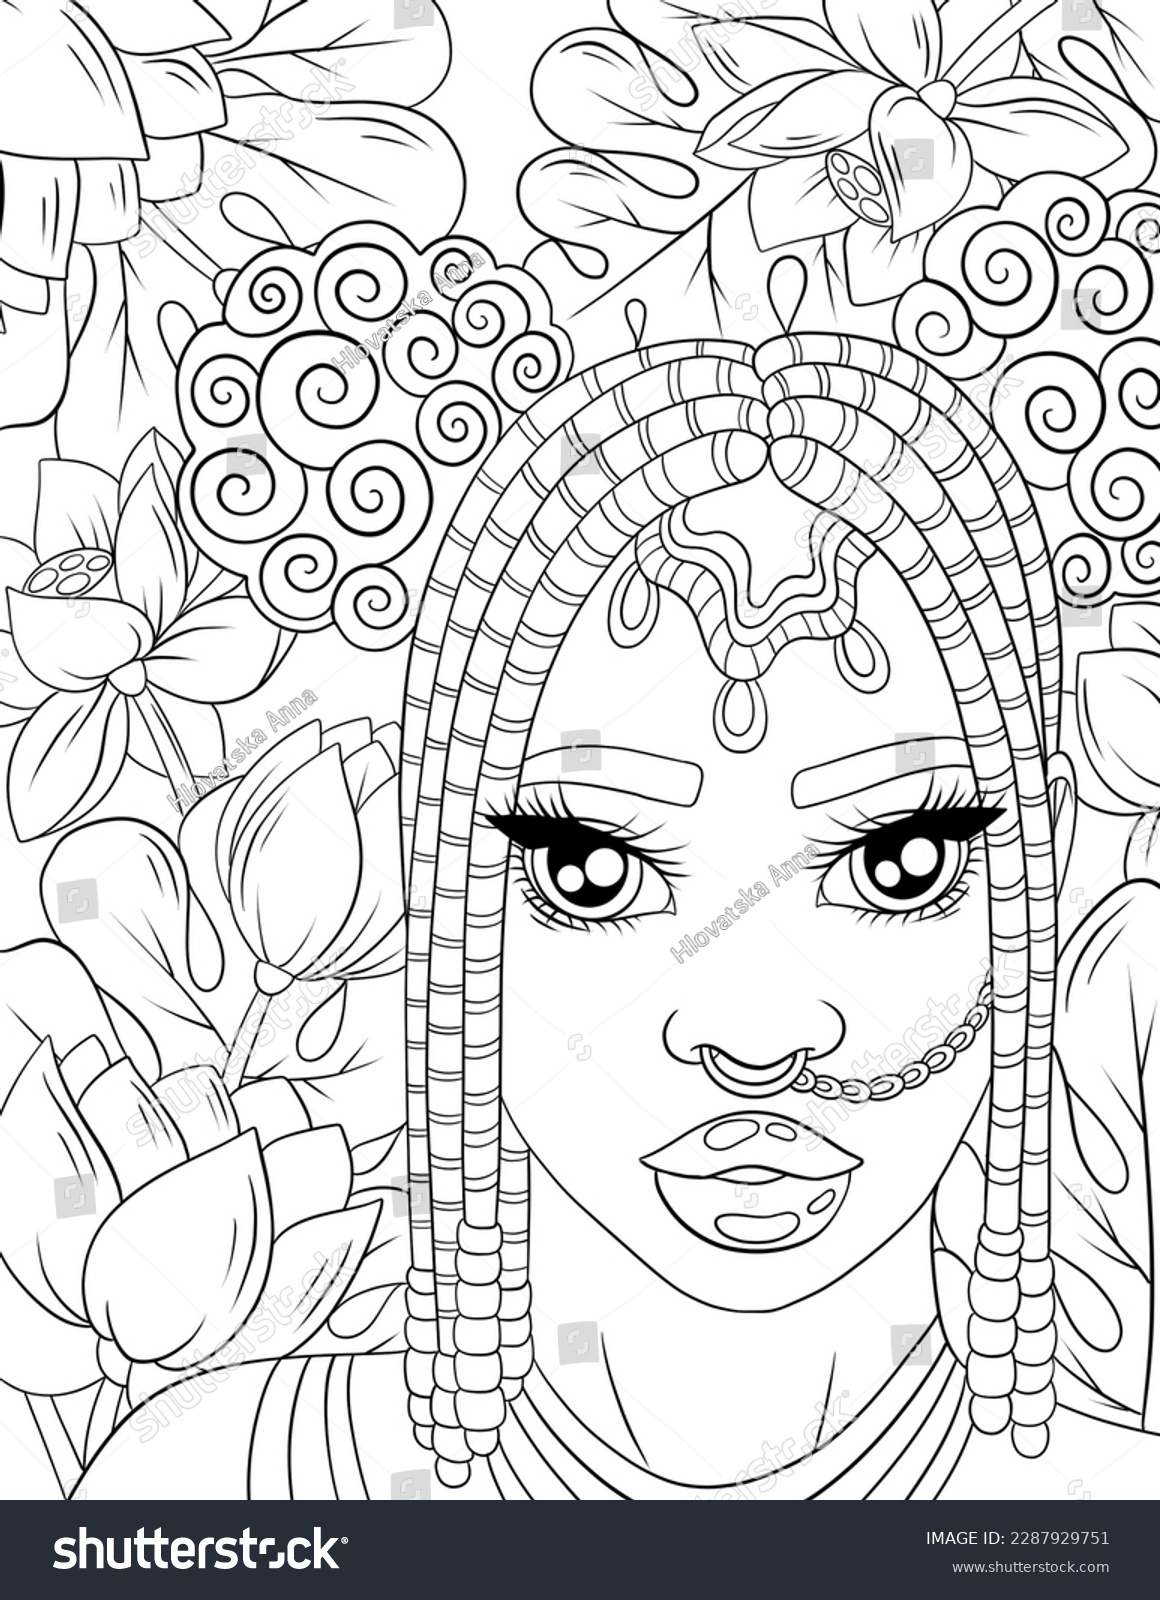 African american coloring page images stock photos d objects vectors